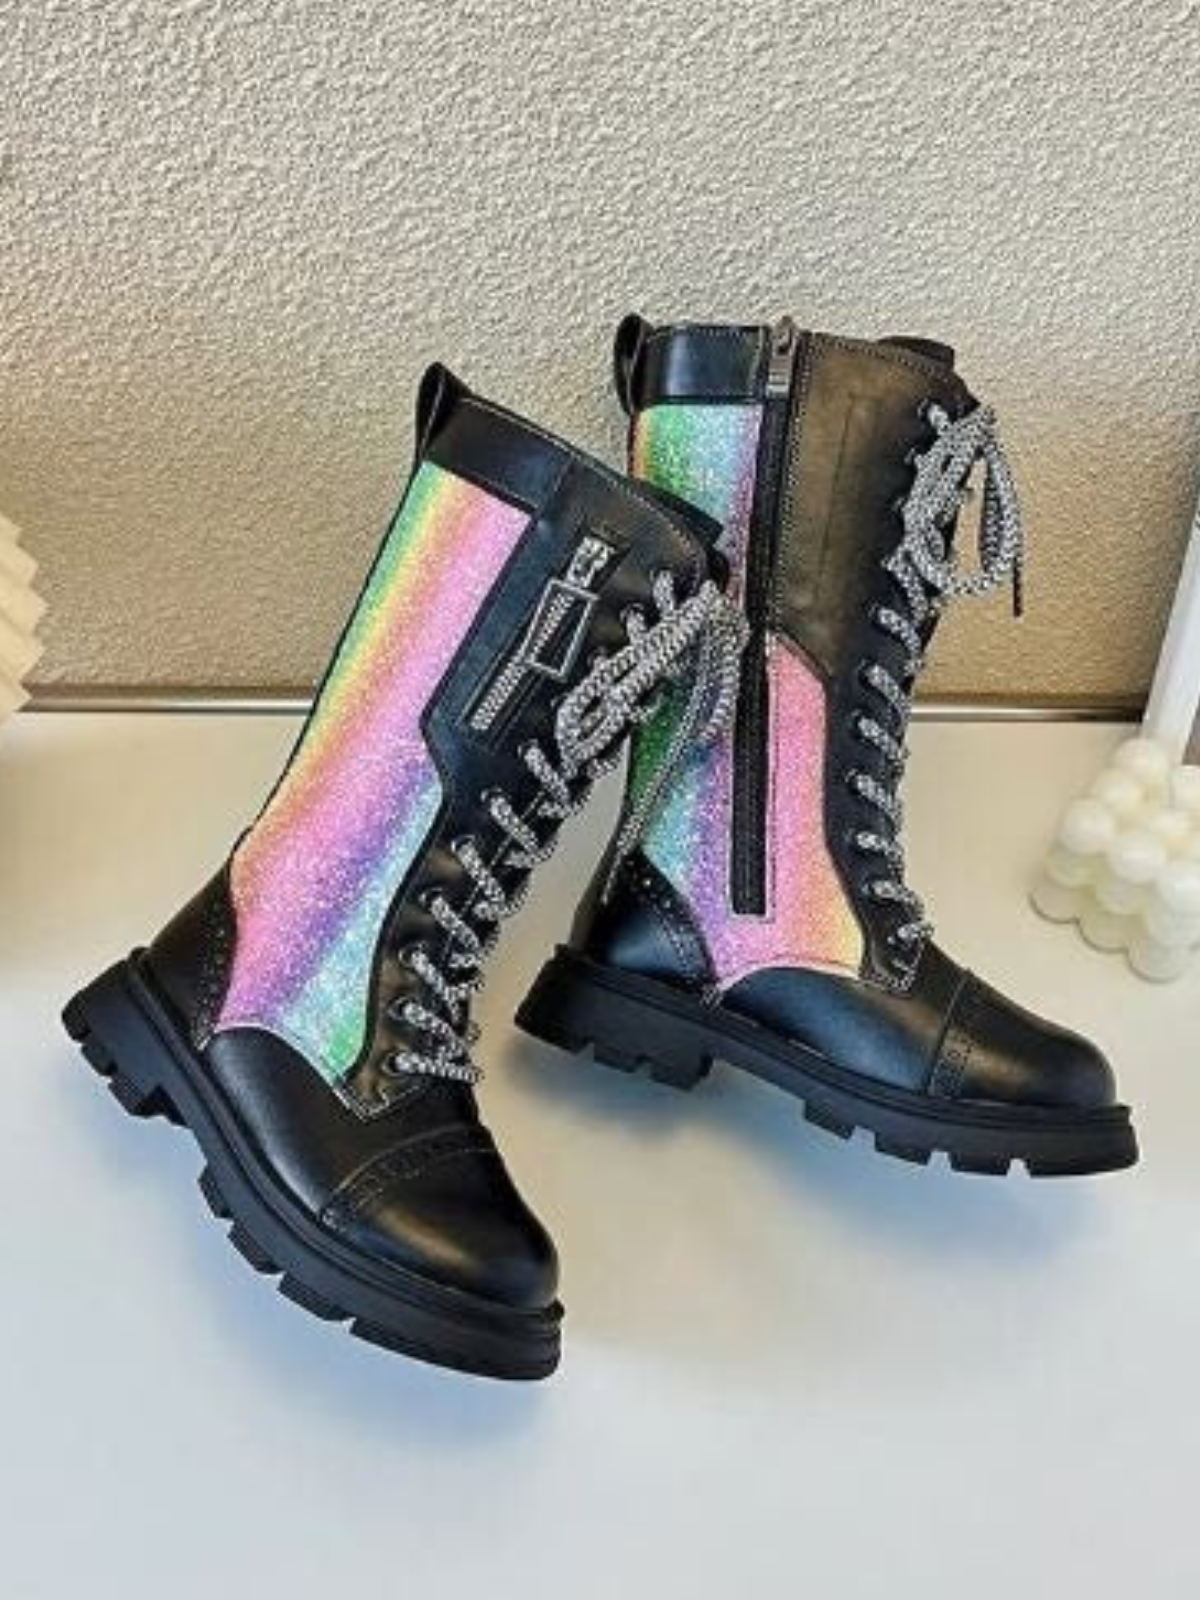 Mia Belle Girls Glitter Rainbow Lace-Up Boots | Shoes By Liv and Mia